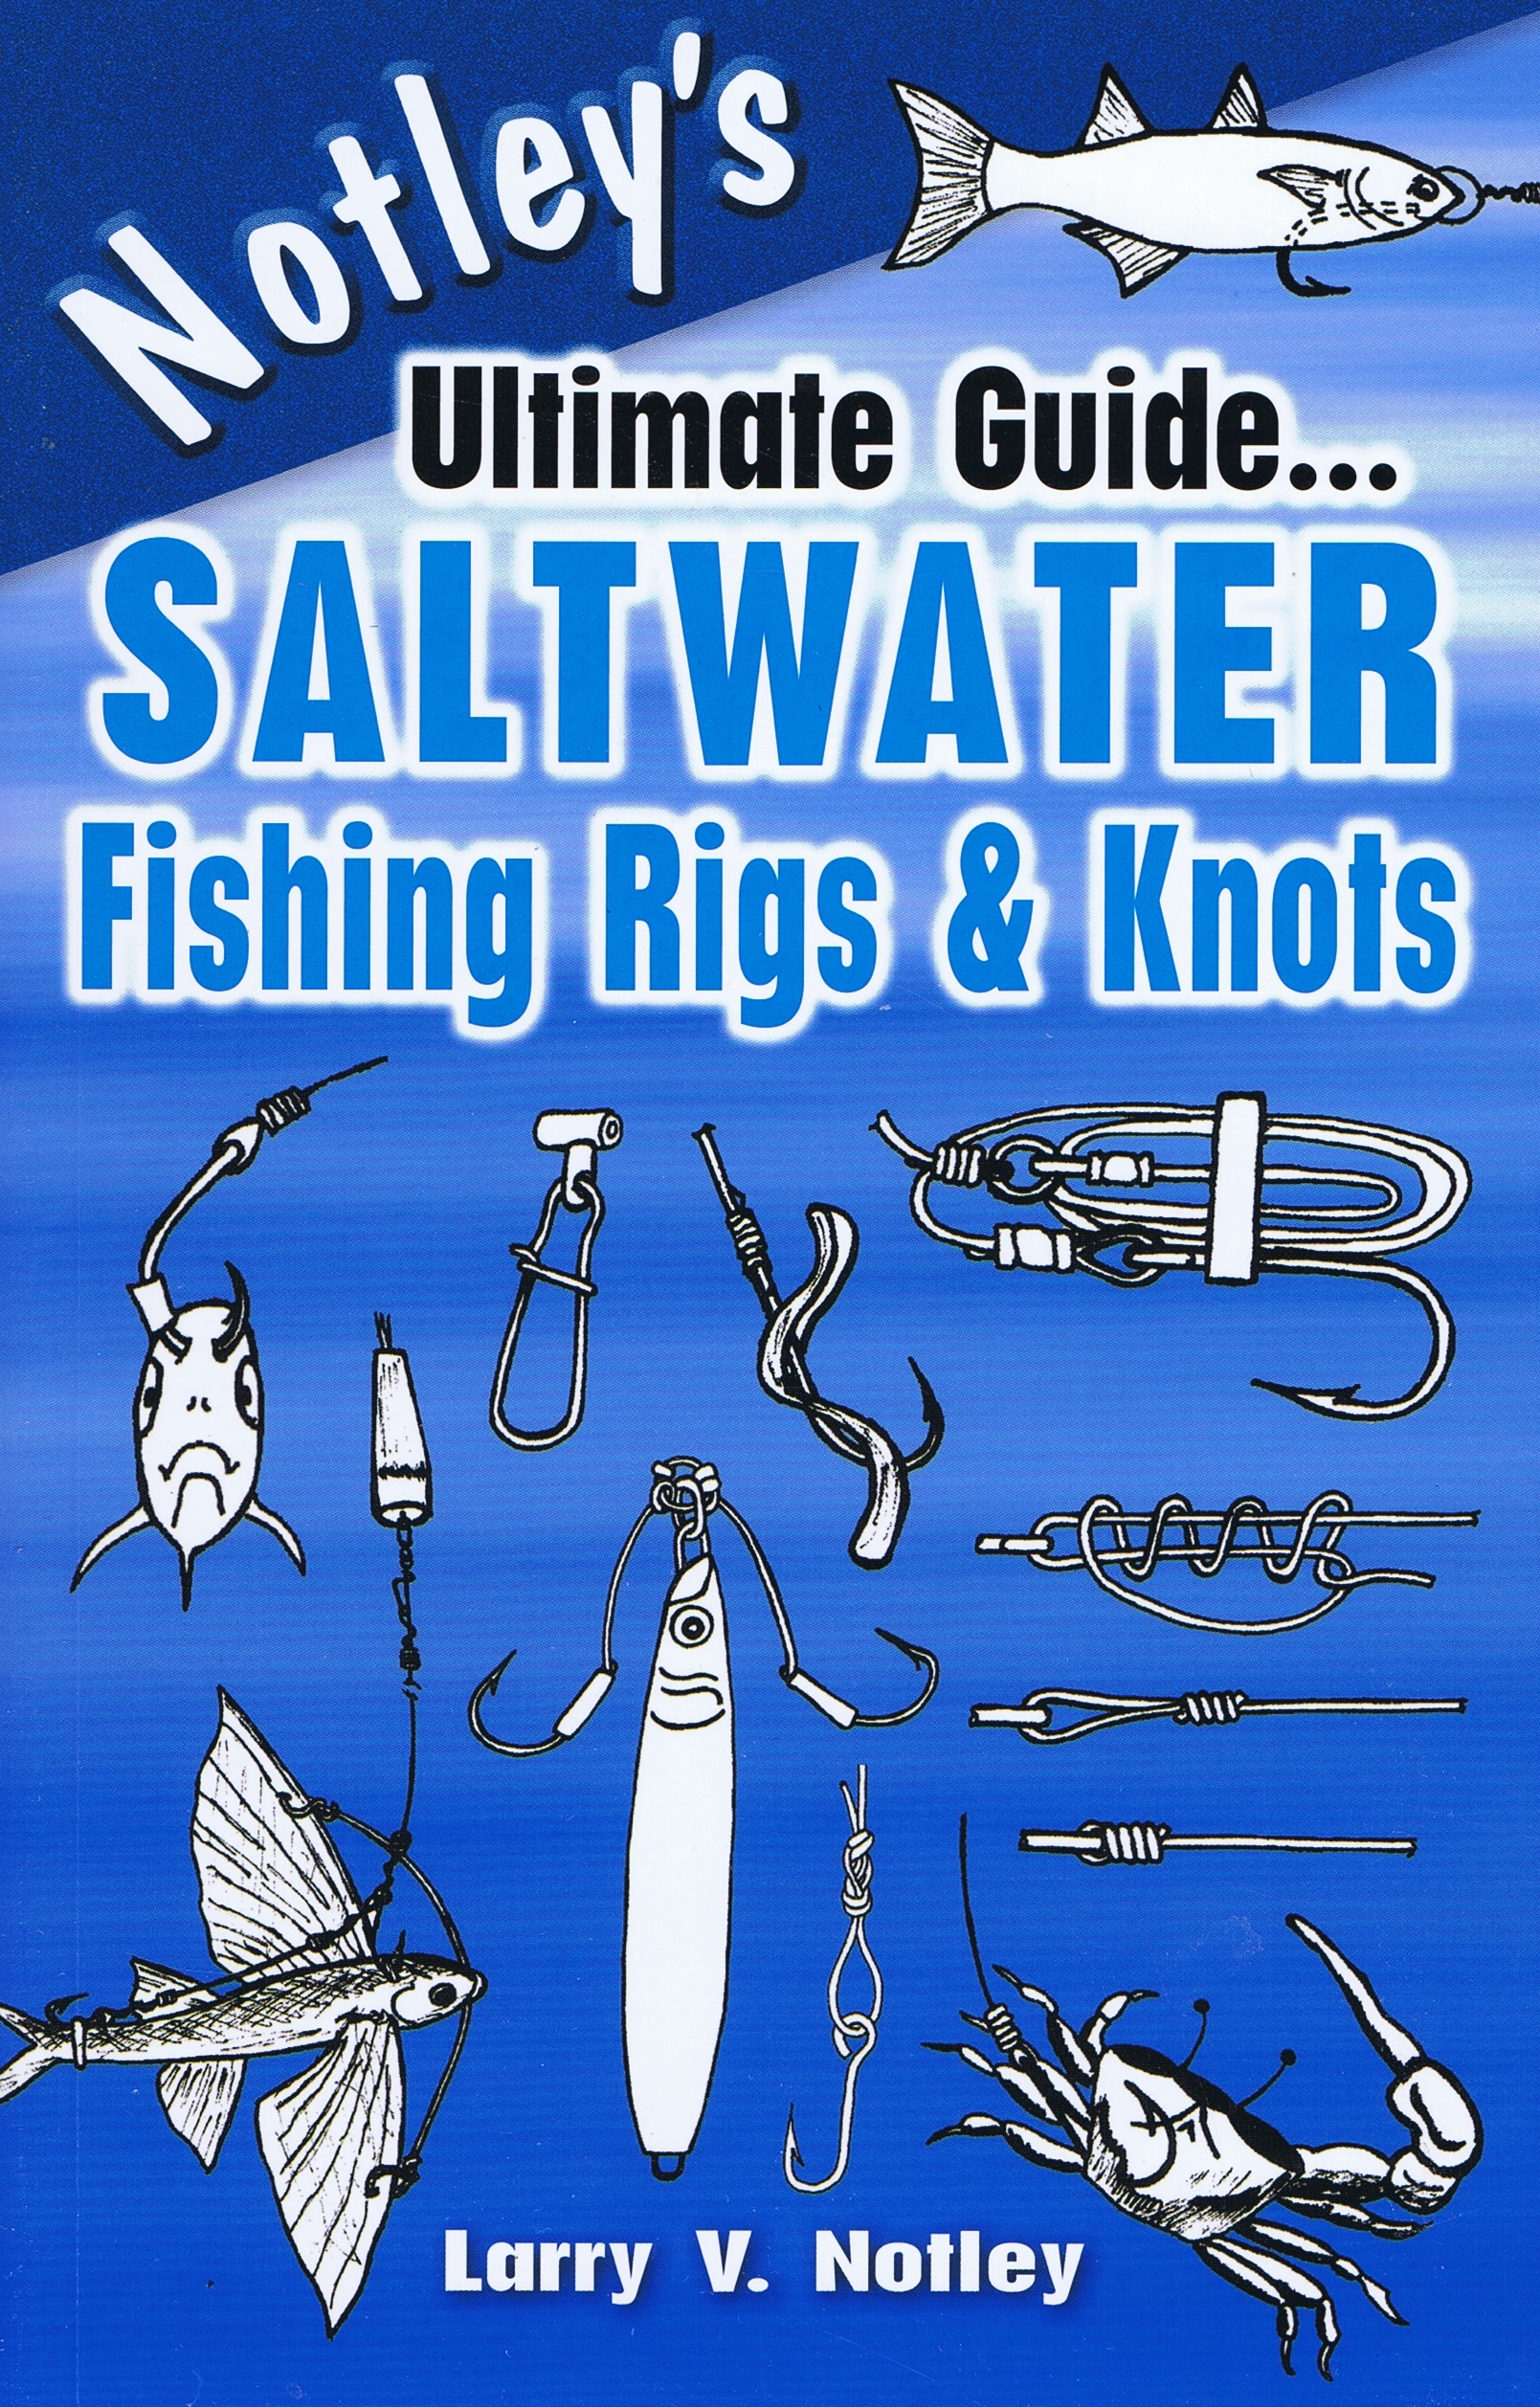 Notely's Ultimate Guide for Saltwater Fishing Knots